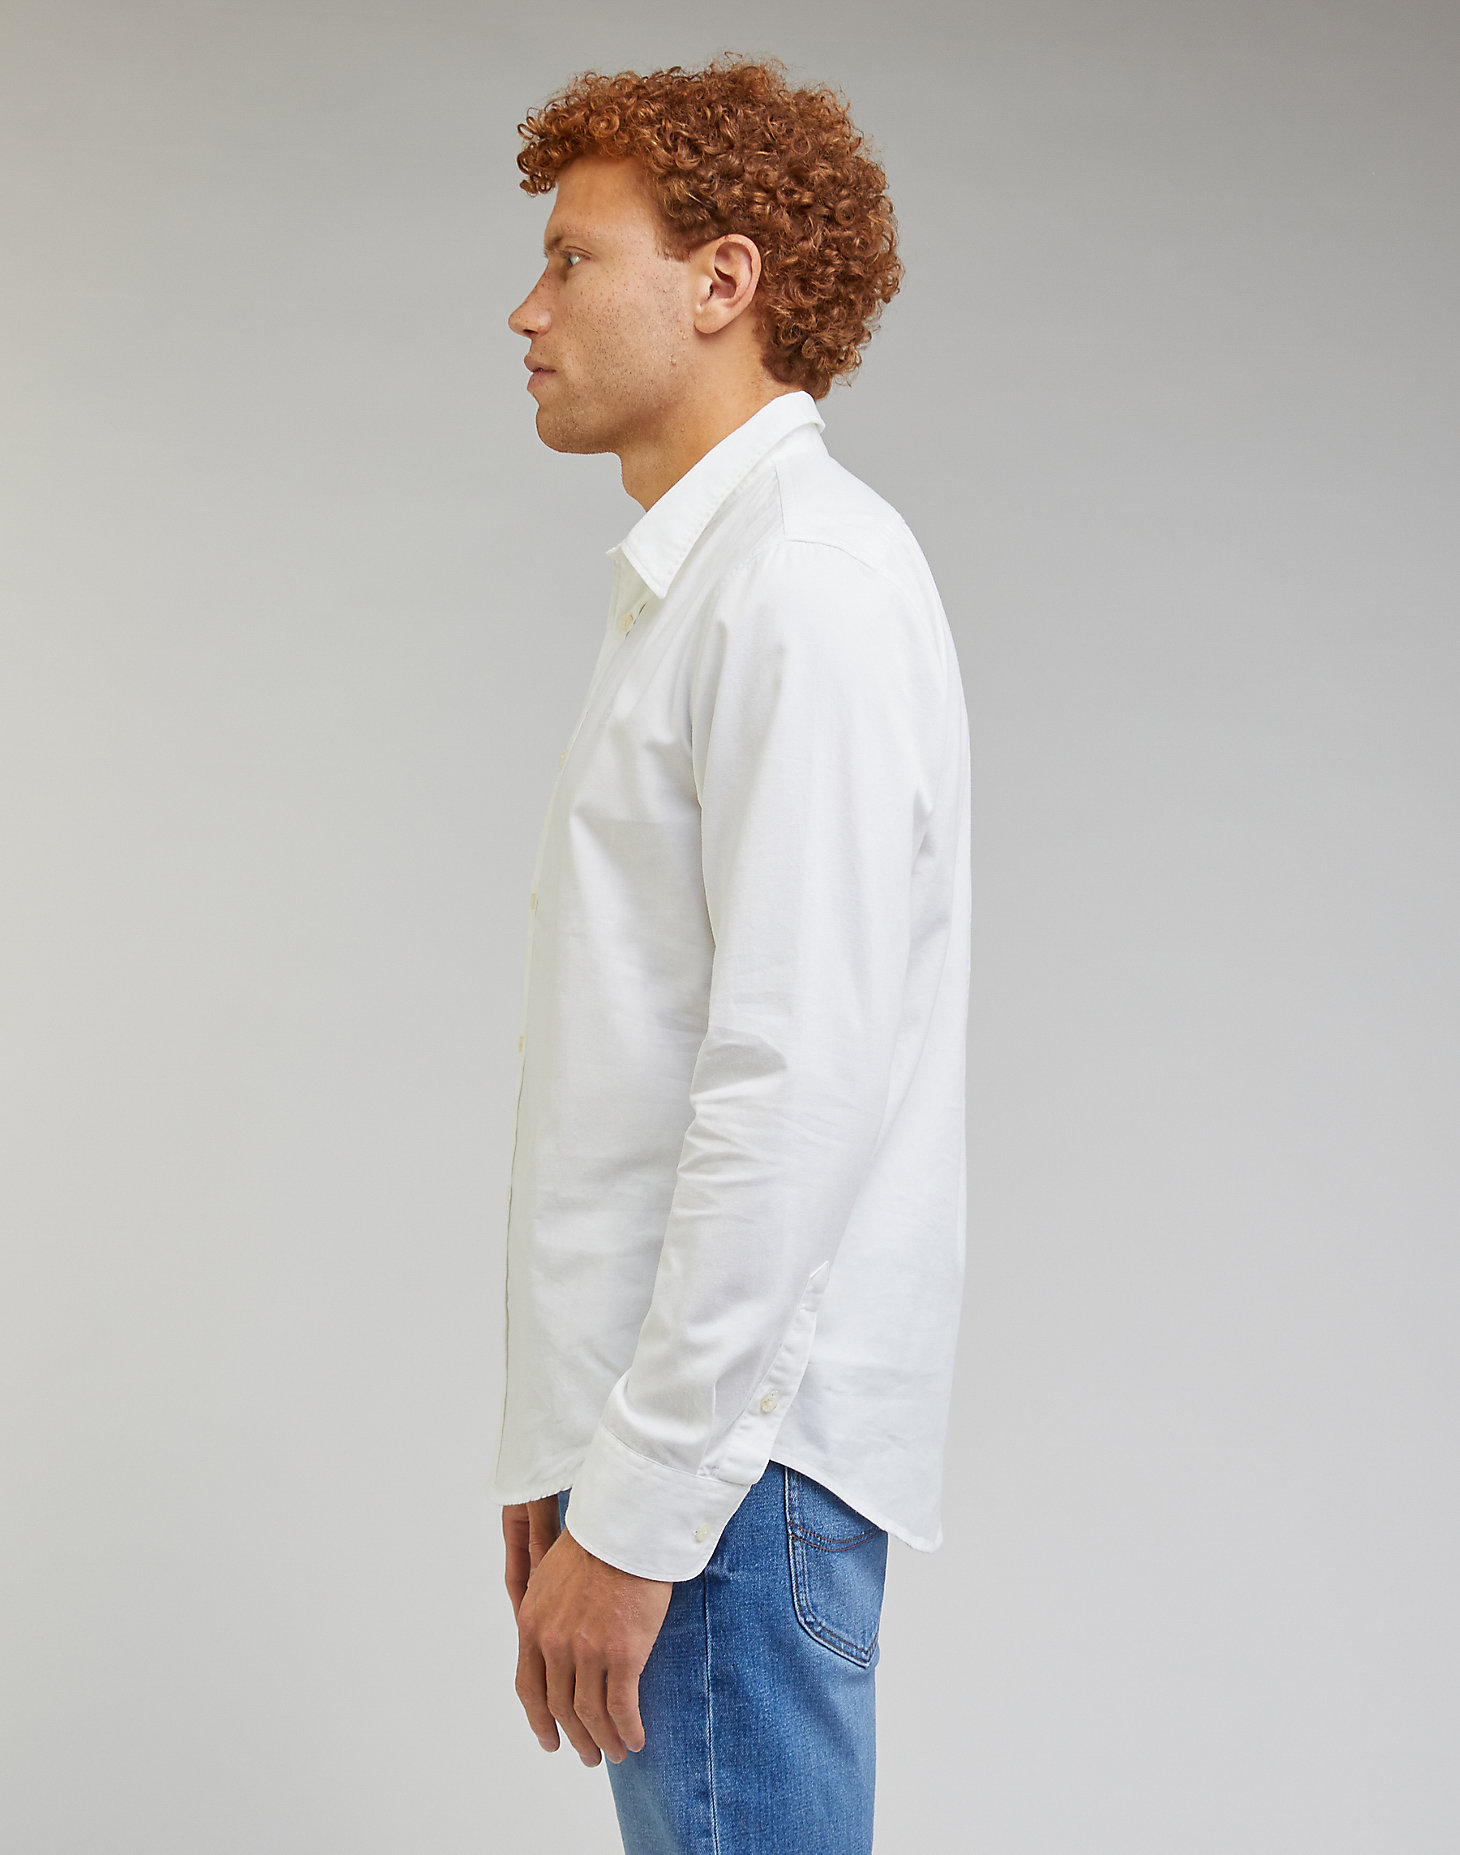 Patch Shirt in Bright White alternative view 3